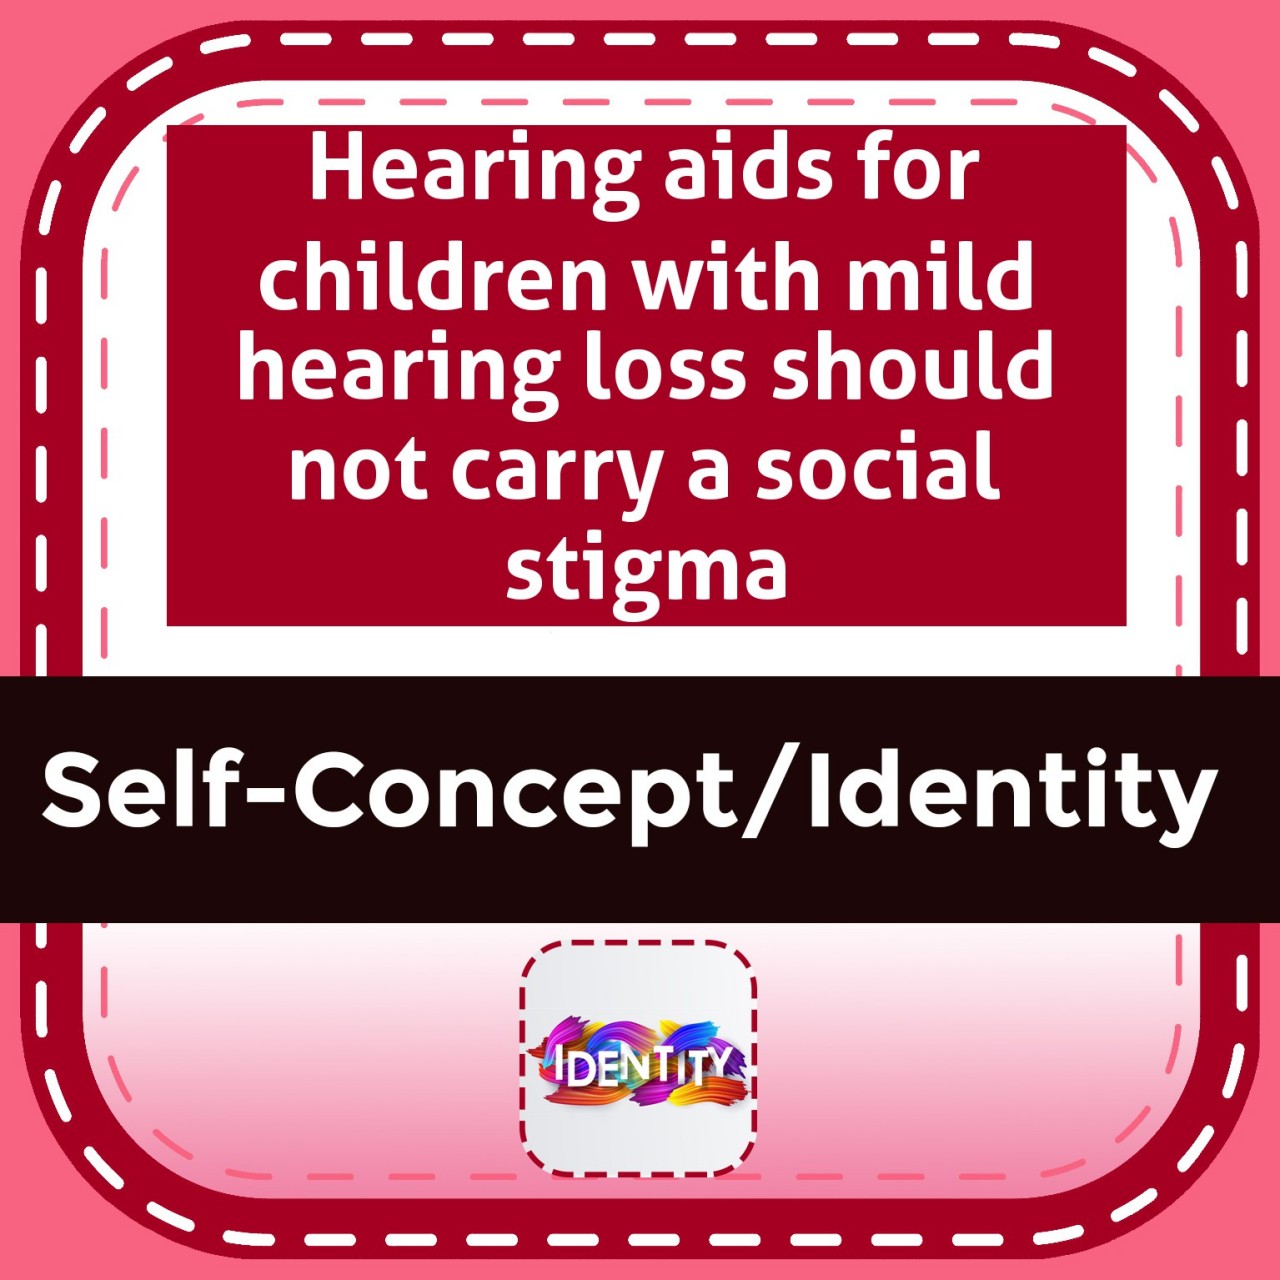 Hearing aids for children with mild hearing loss should not carry a social stigma